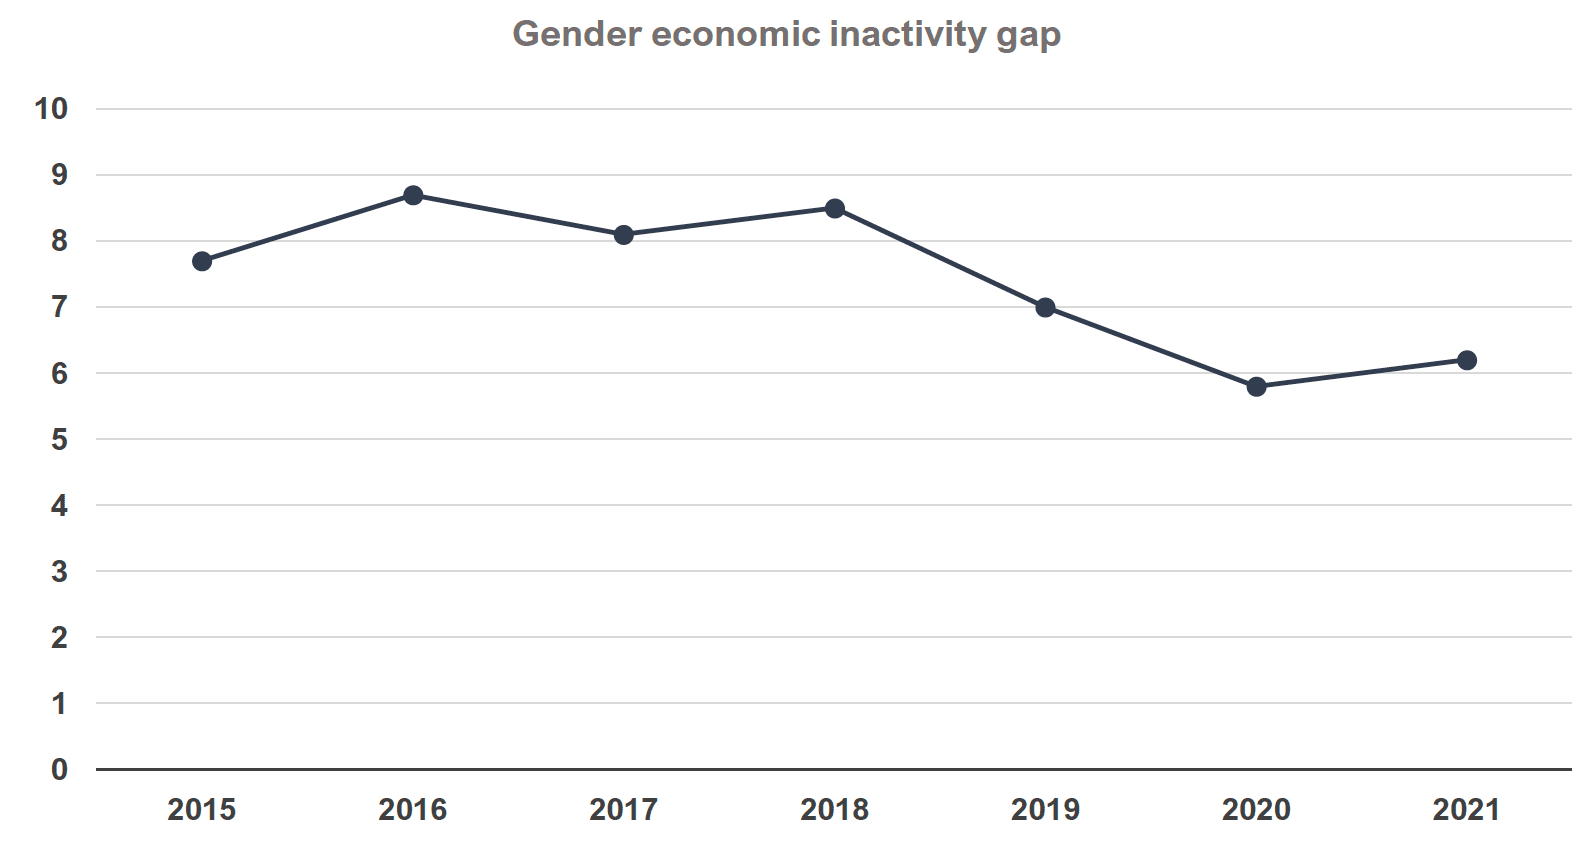 Graph depicts the trend of the economic inactivity gap in Scotland between 2015-2021, in a line chart. The economic inactivity gap was 7.7 percentage points in 2015, 8.7 percentage points in 2016, 8.1 percentage points in 2017, 8.5 percentage points in 2018, 7 percentage points in 2019, 5.8 percentage points in 2020, and 6.2 percentage points in 2021.